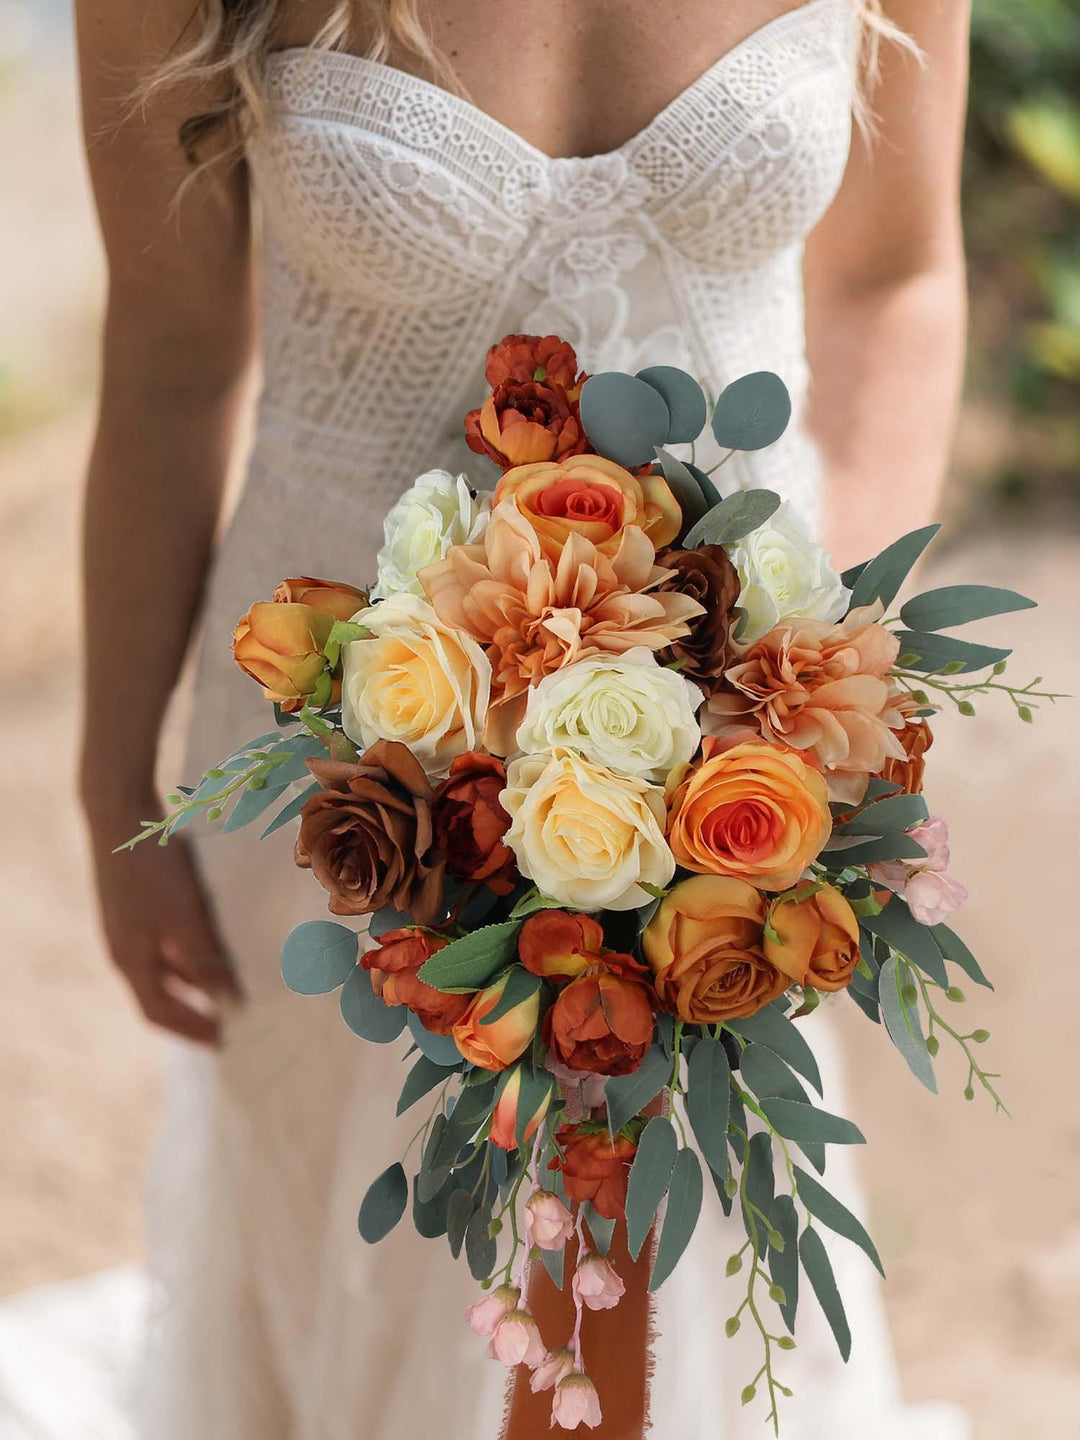 How to Choose the Perfect Wedding Dress to Complement Your Beloved Burnt Orange Cascade Bouquet? - Rinlong Flower